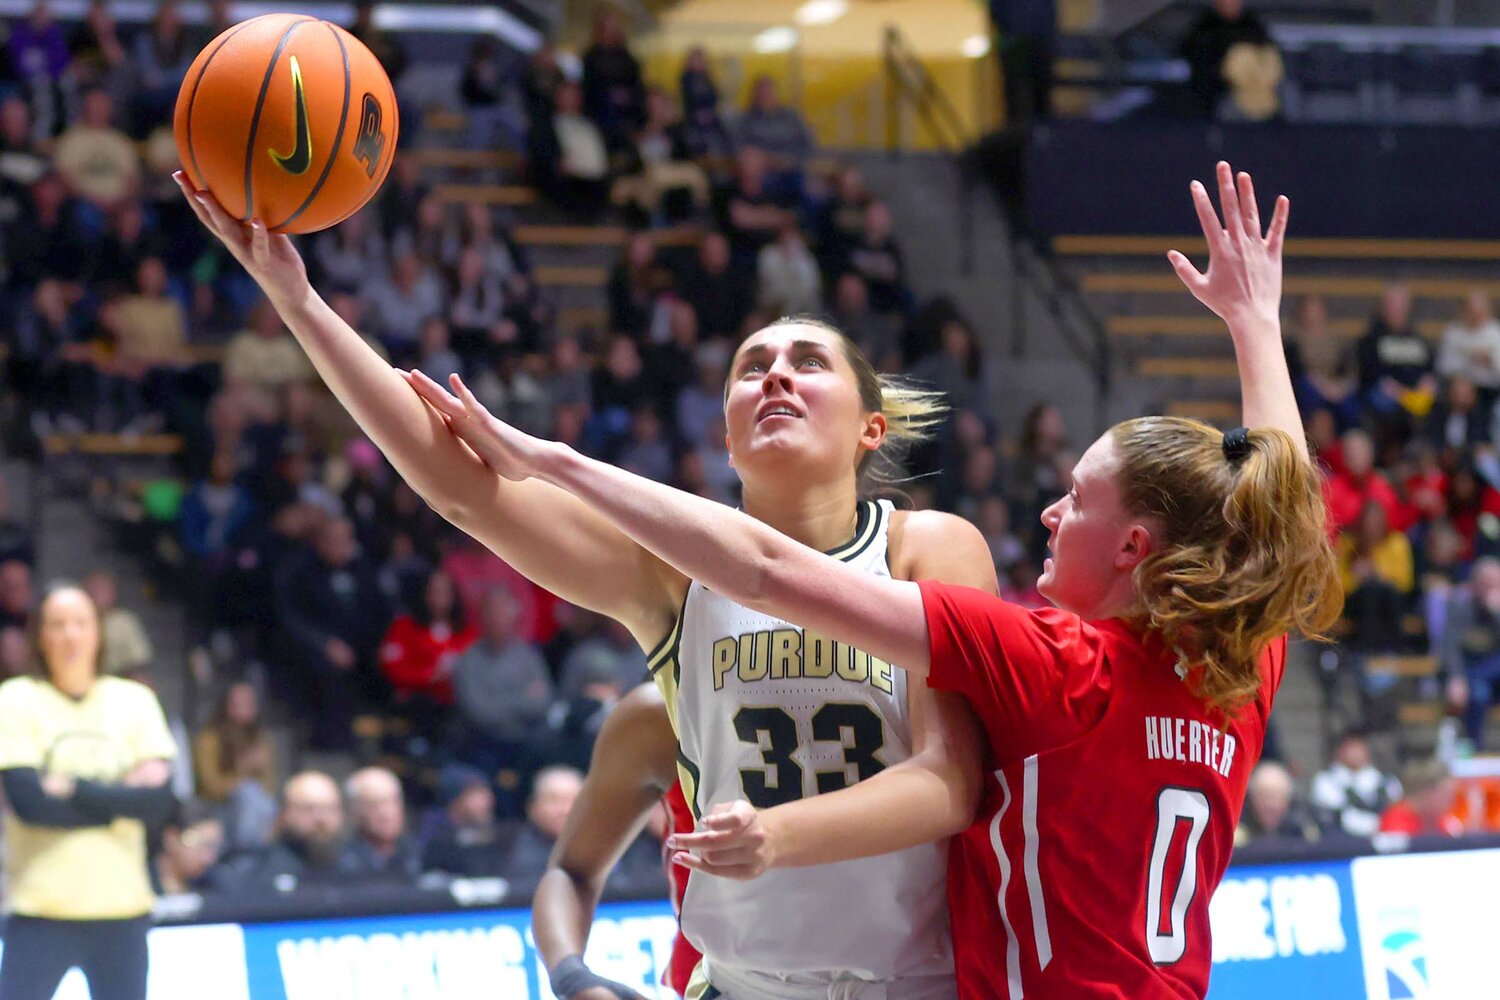 Madison Layden of Purdue - scooping a lay-up against Jillian Huerter of Rutgers